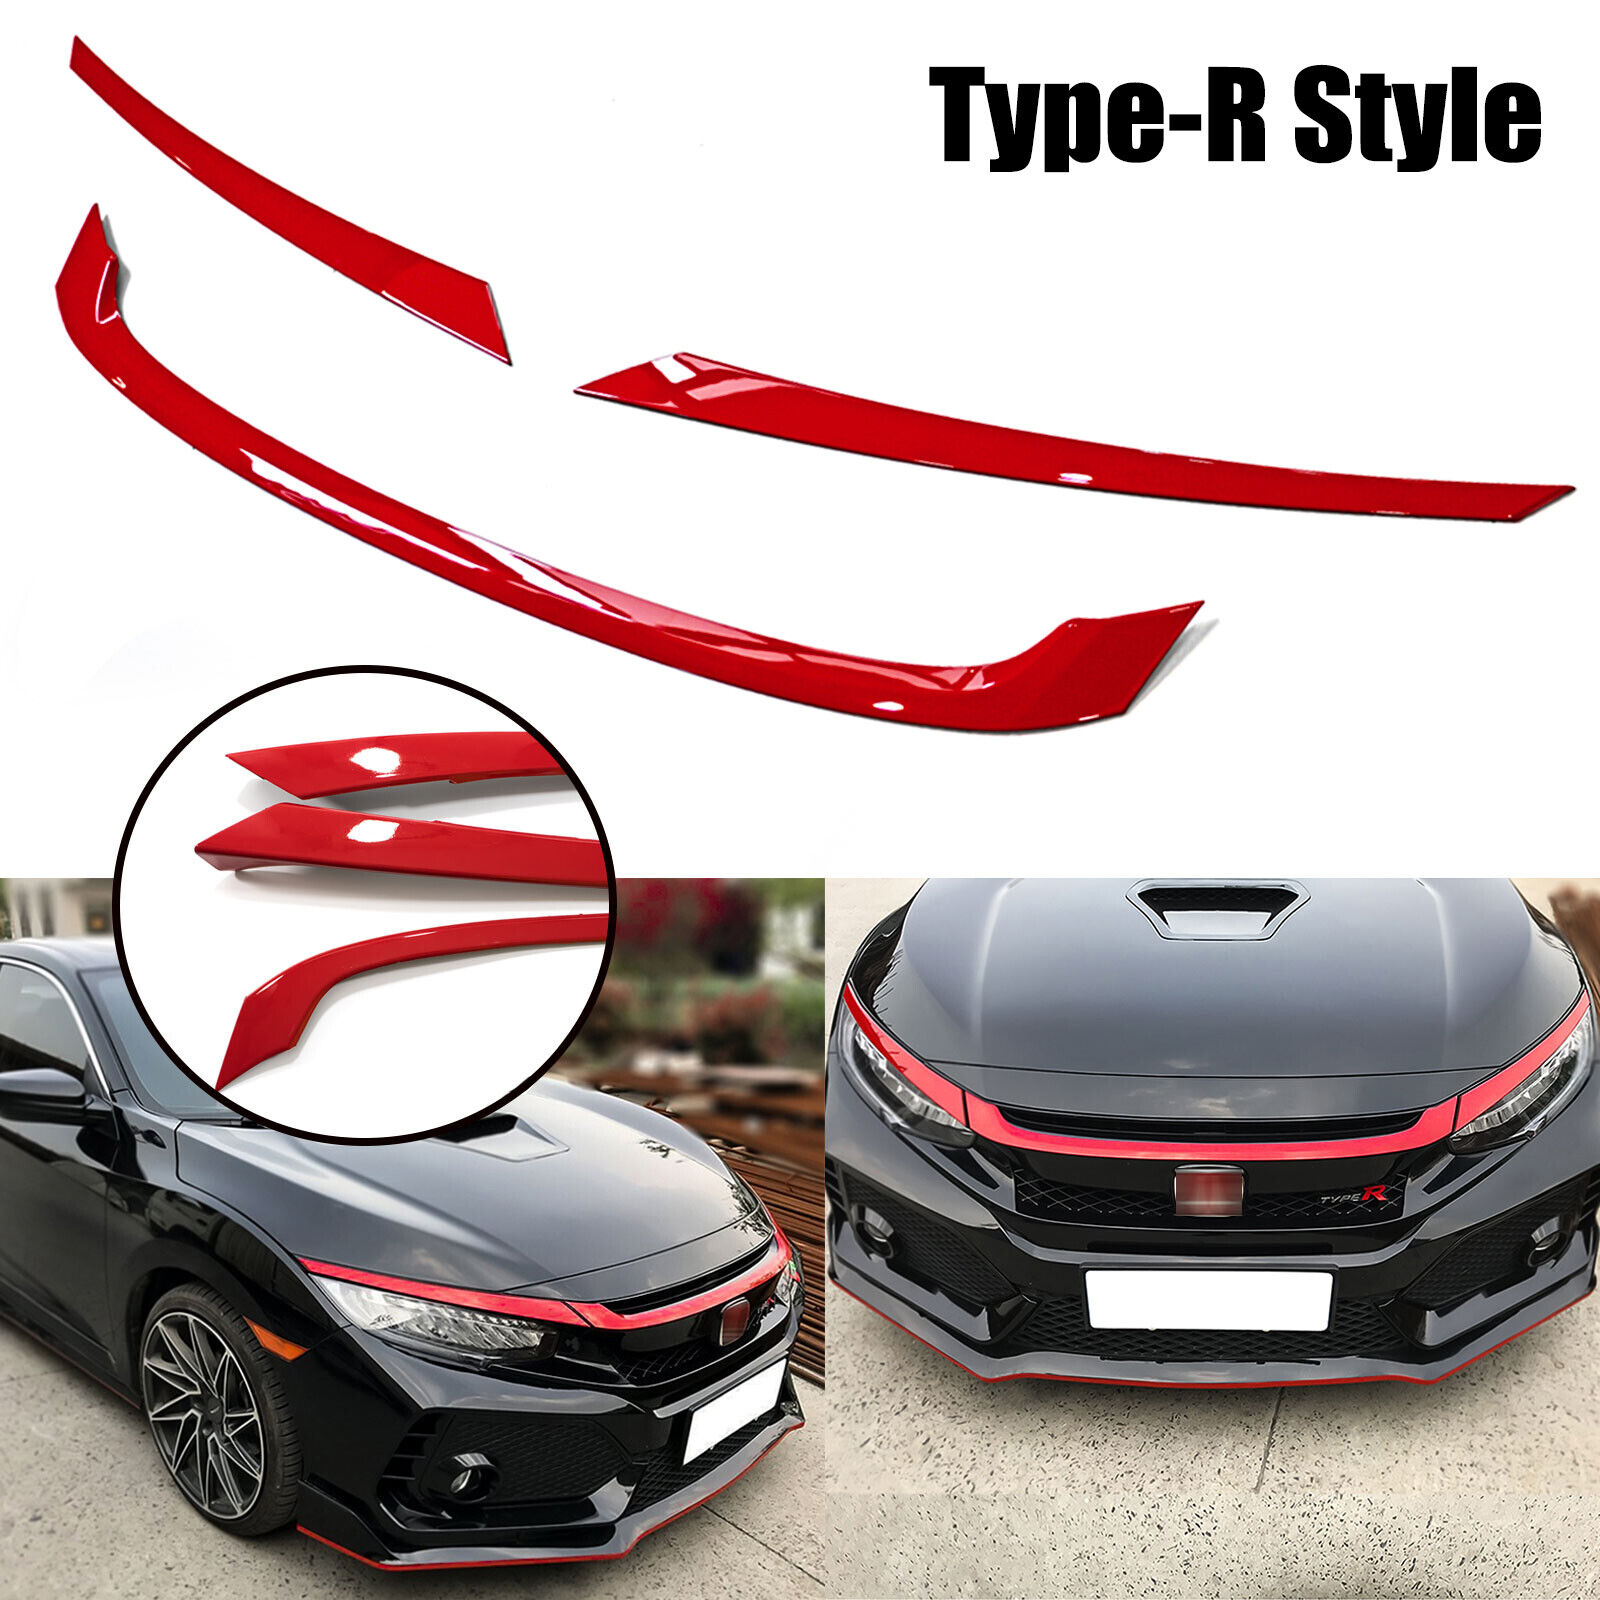 Type-R Style Sporty Red Front Bumper Grille Decal Trim For Honda Civic 2016-2021